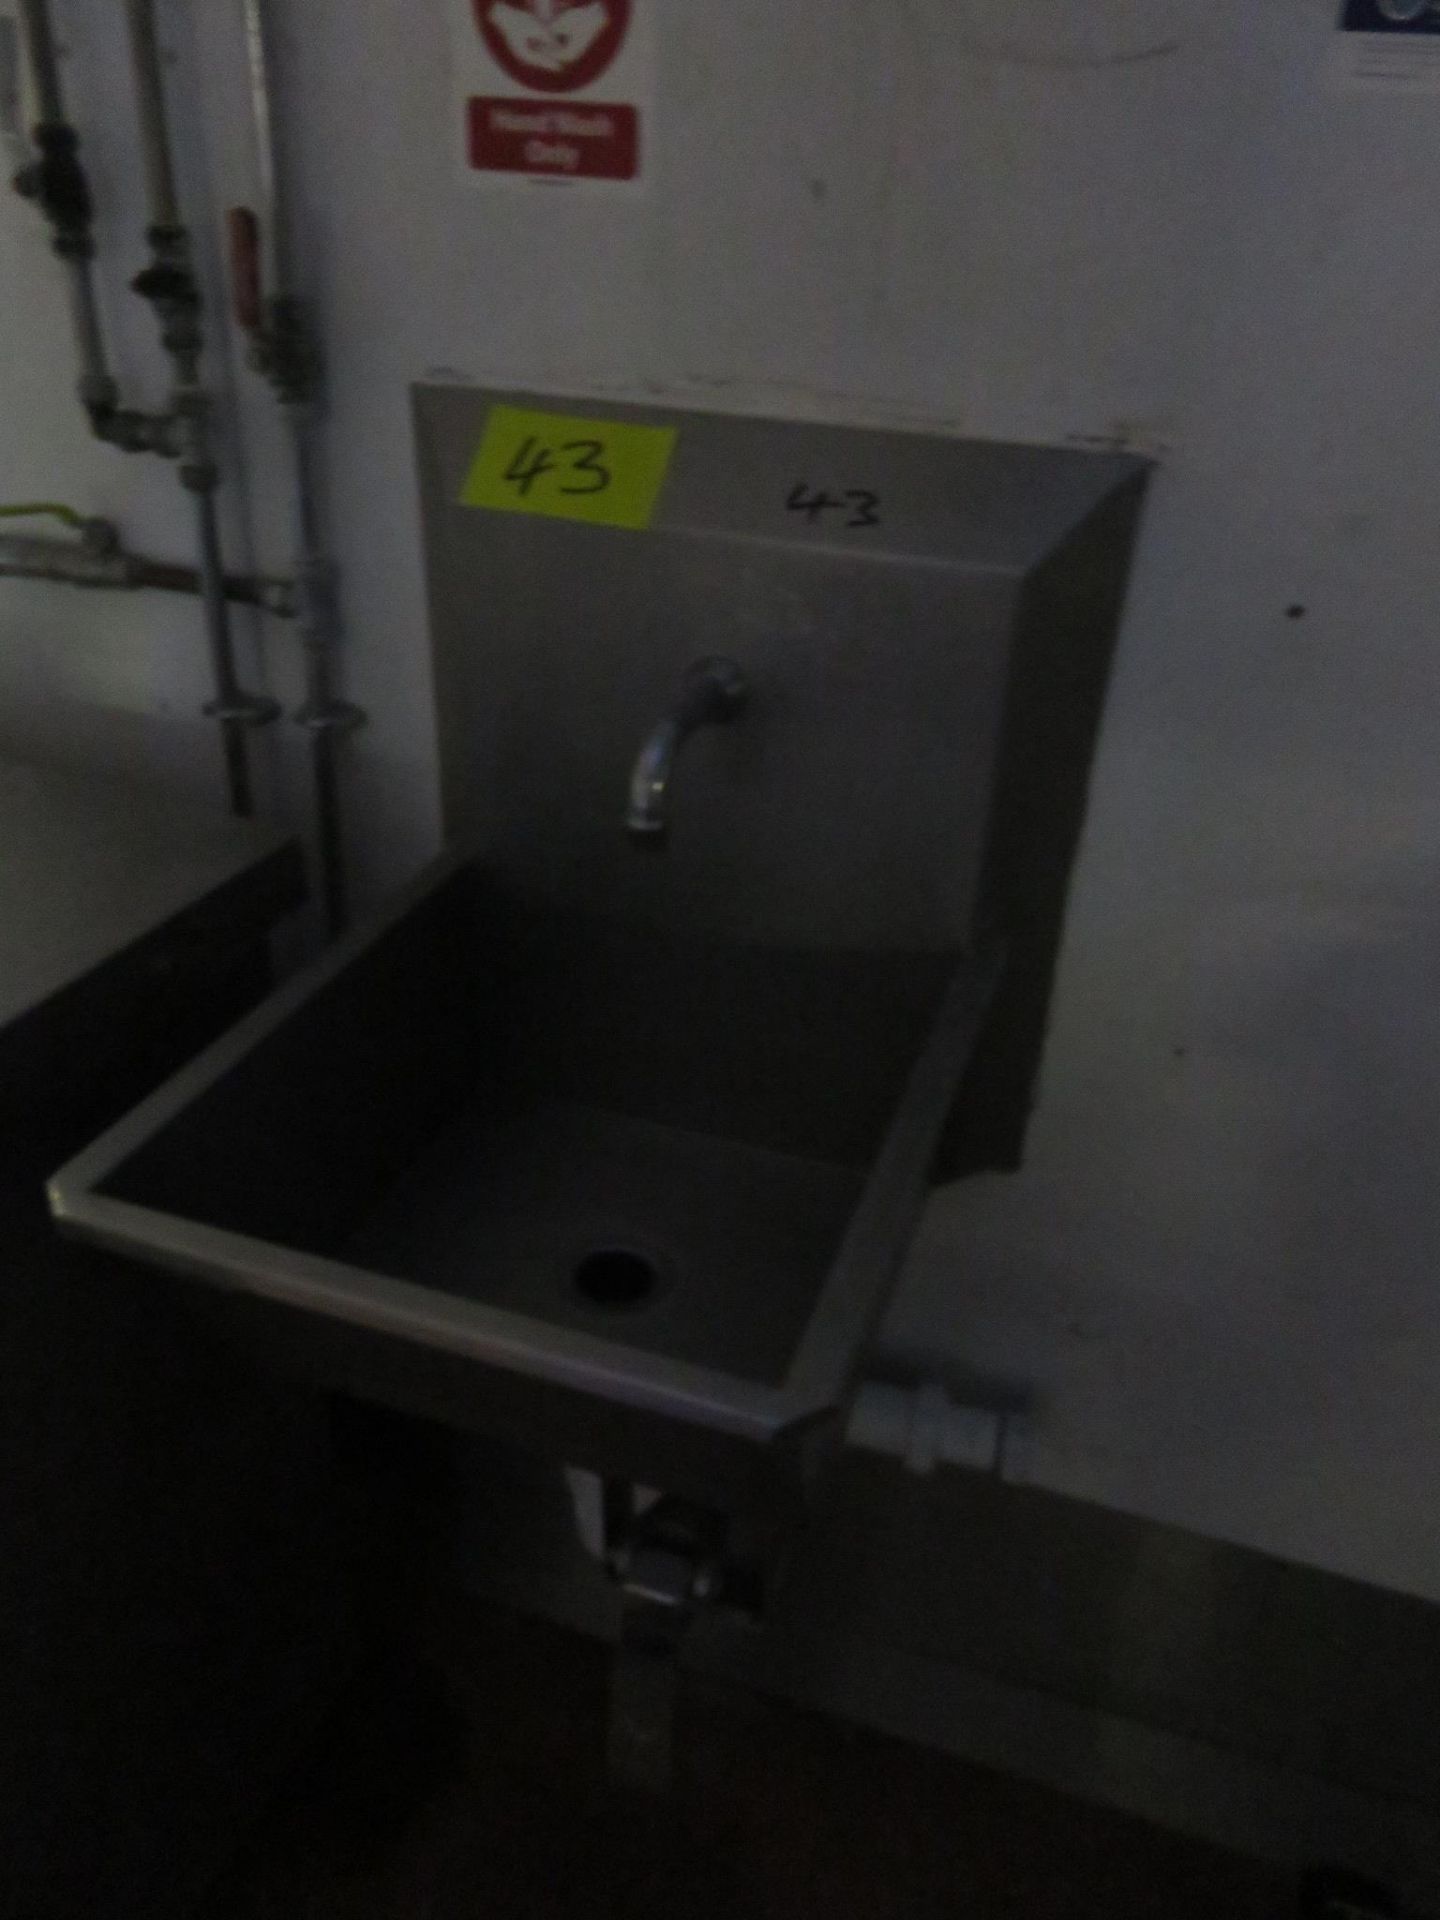 SINGLE STATION KNEE OPERATED SINK. - Image 2 of 2